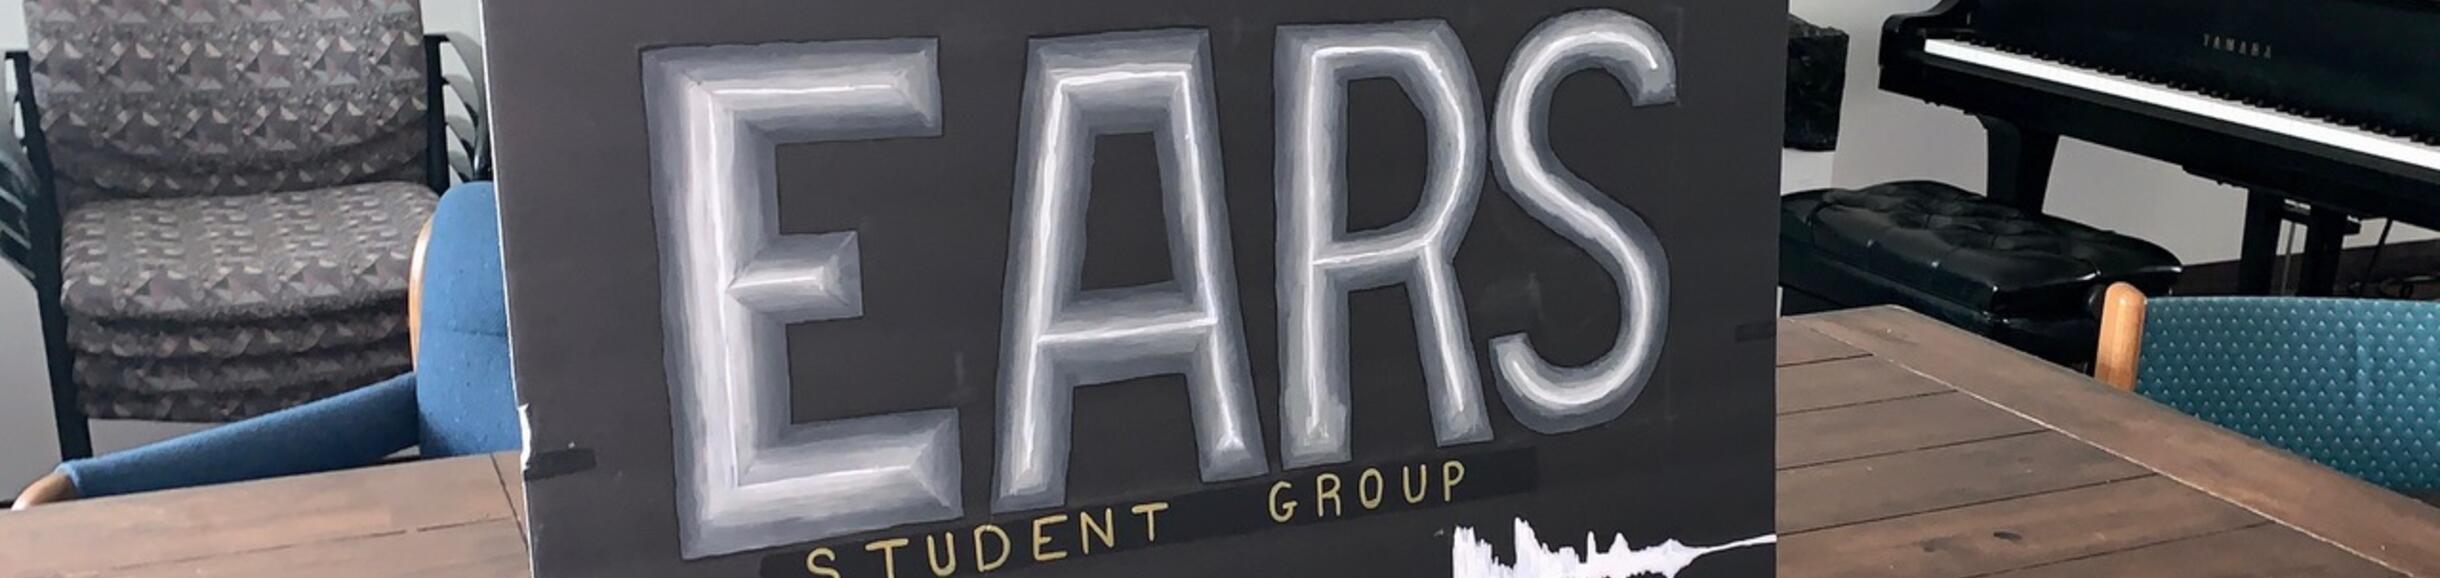 EARS Student Group